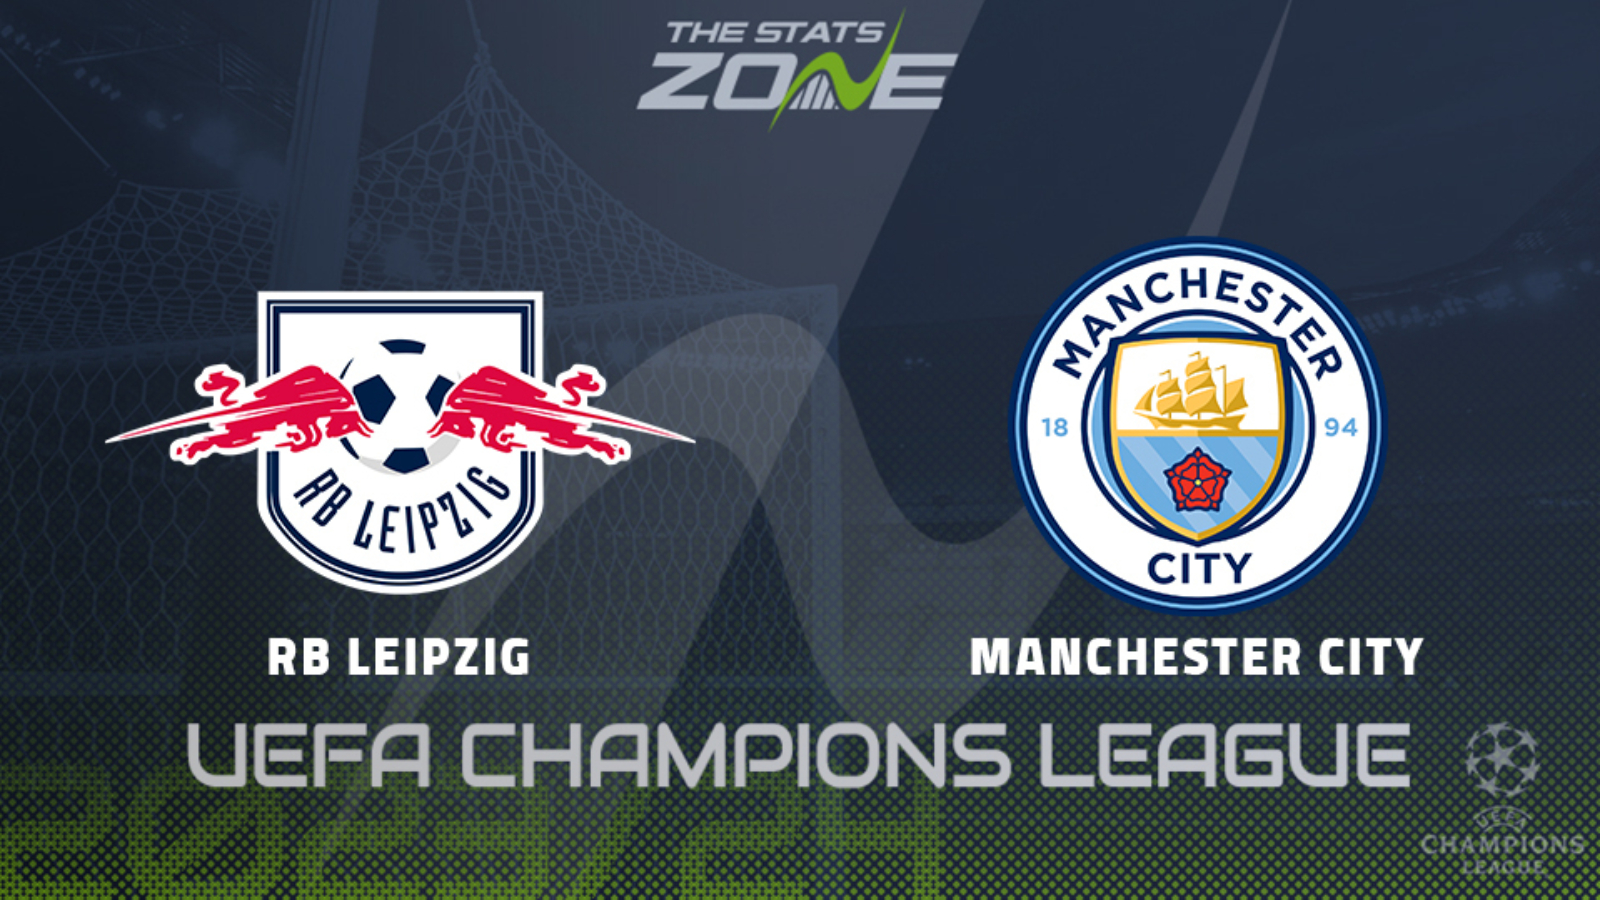 watch champions league online free live streaming reddit